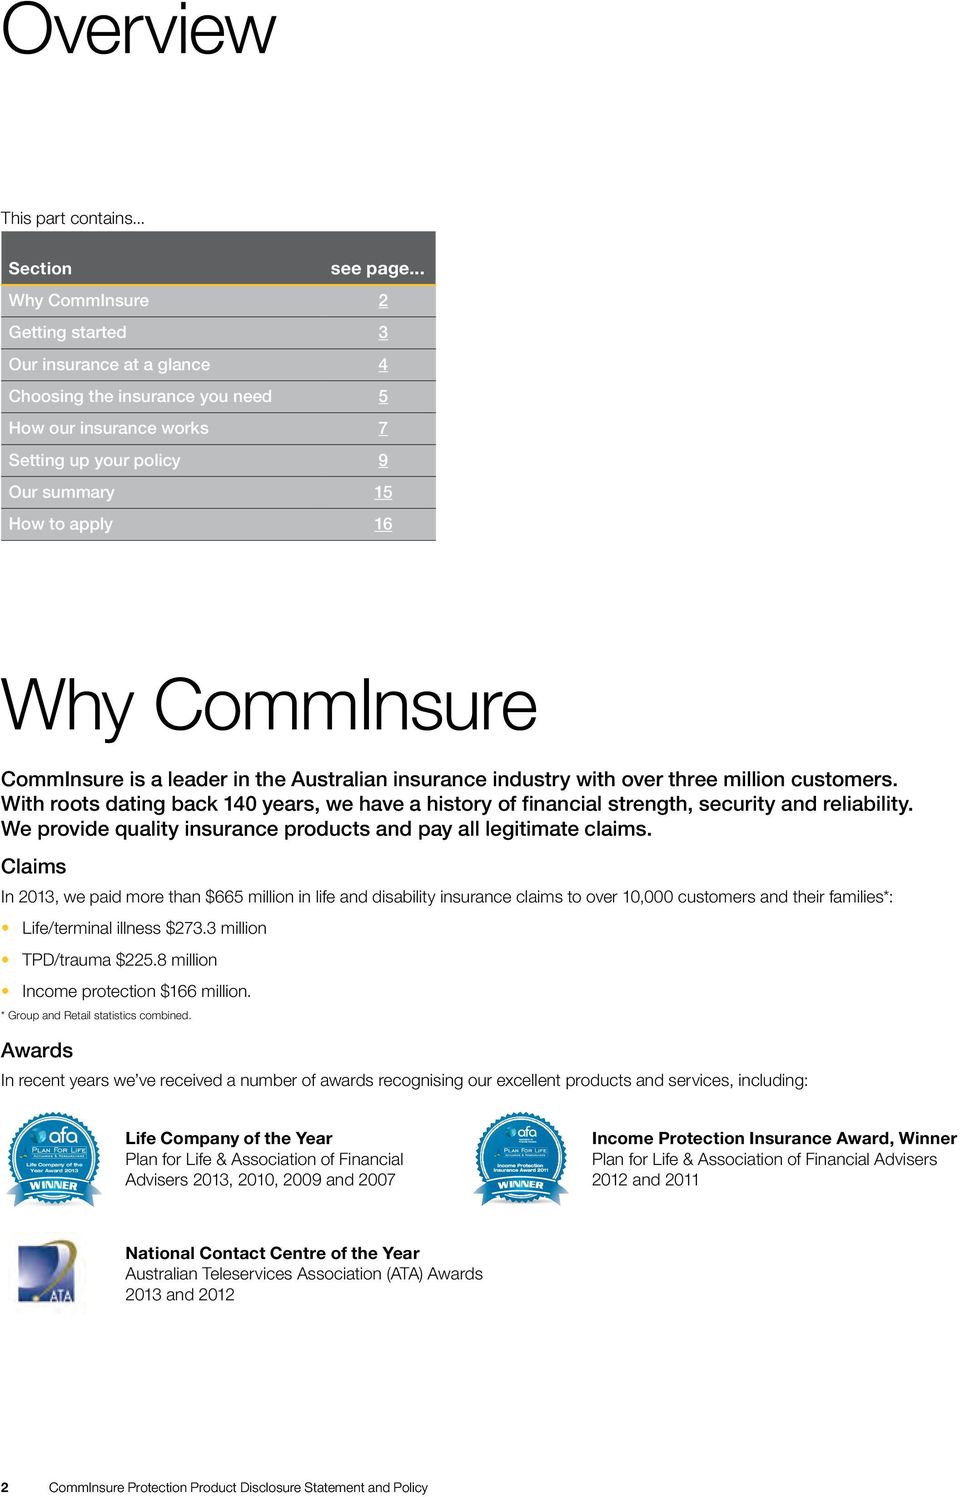 CommInsure is a leader in the Australian insurance industry with over three million customers. With roots dating back 140 years, we have a history of financial strength, security and reliability.